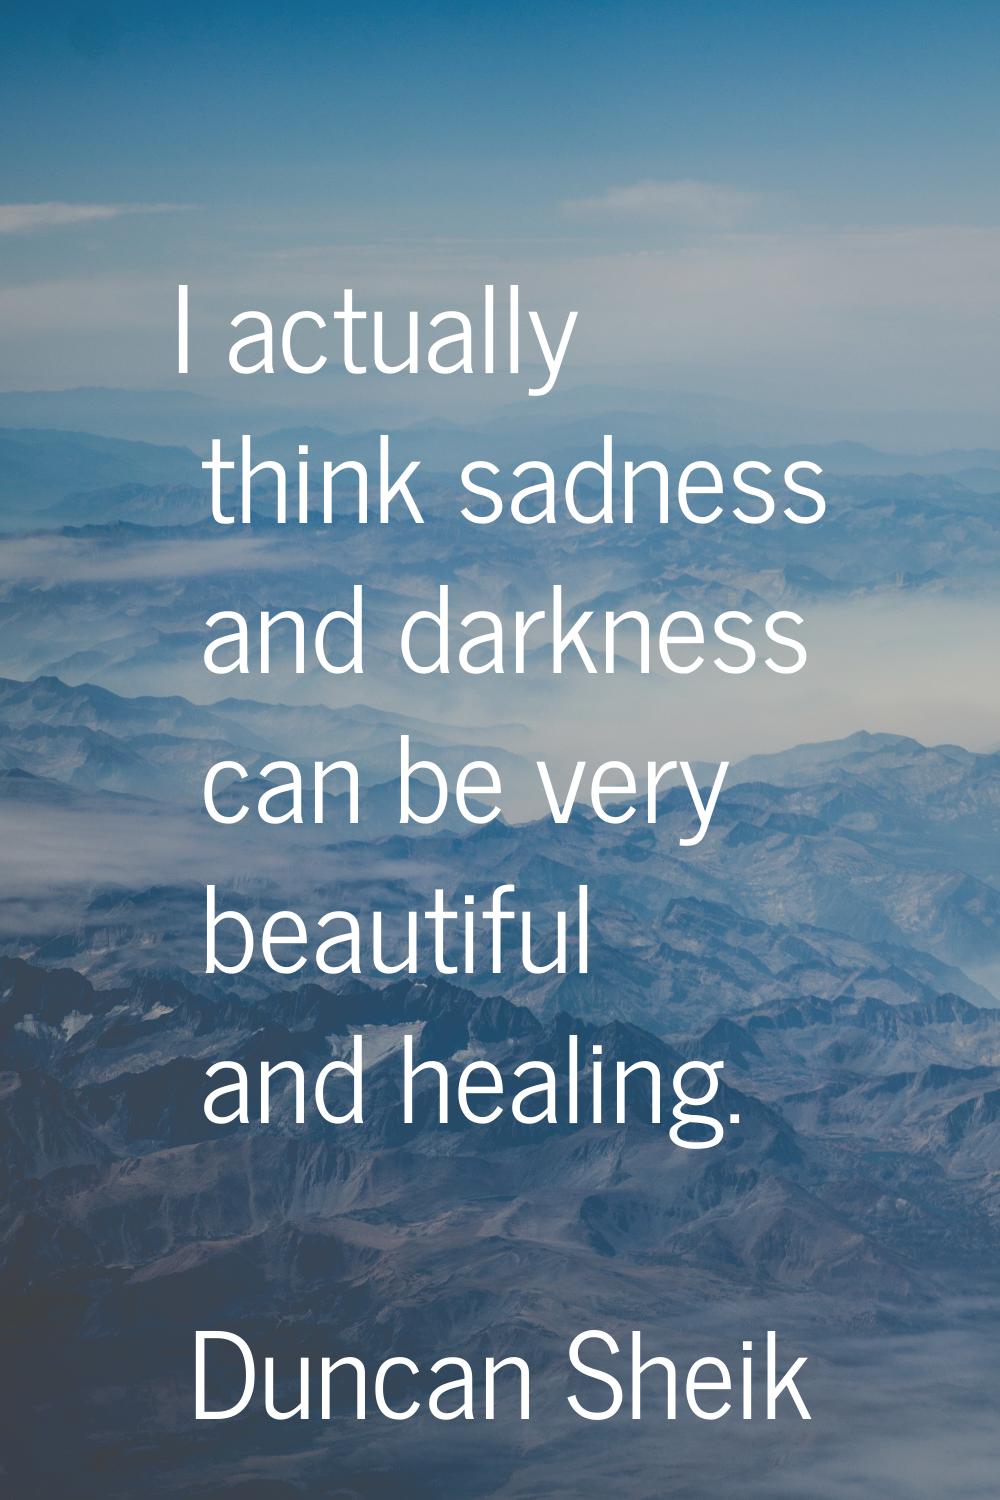 I actually think sadness and darkness can be very beautiful and healing.